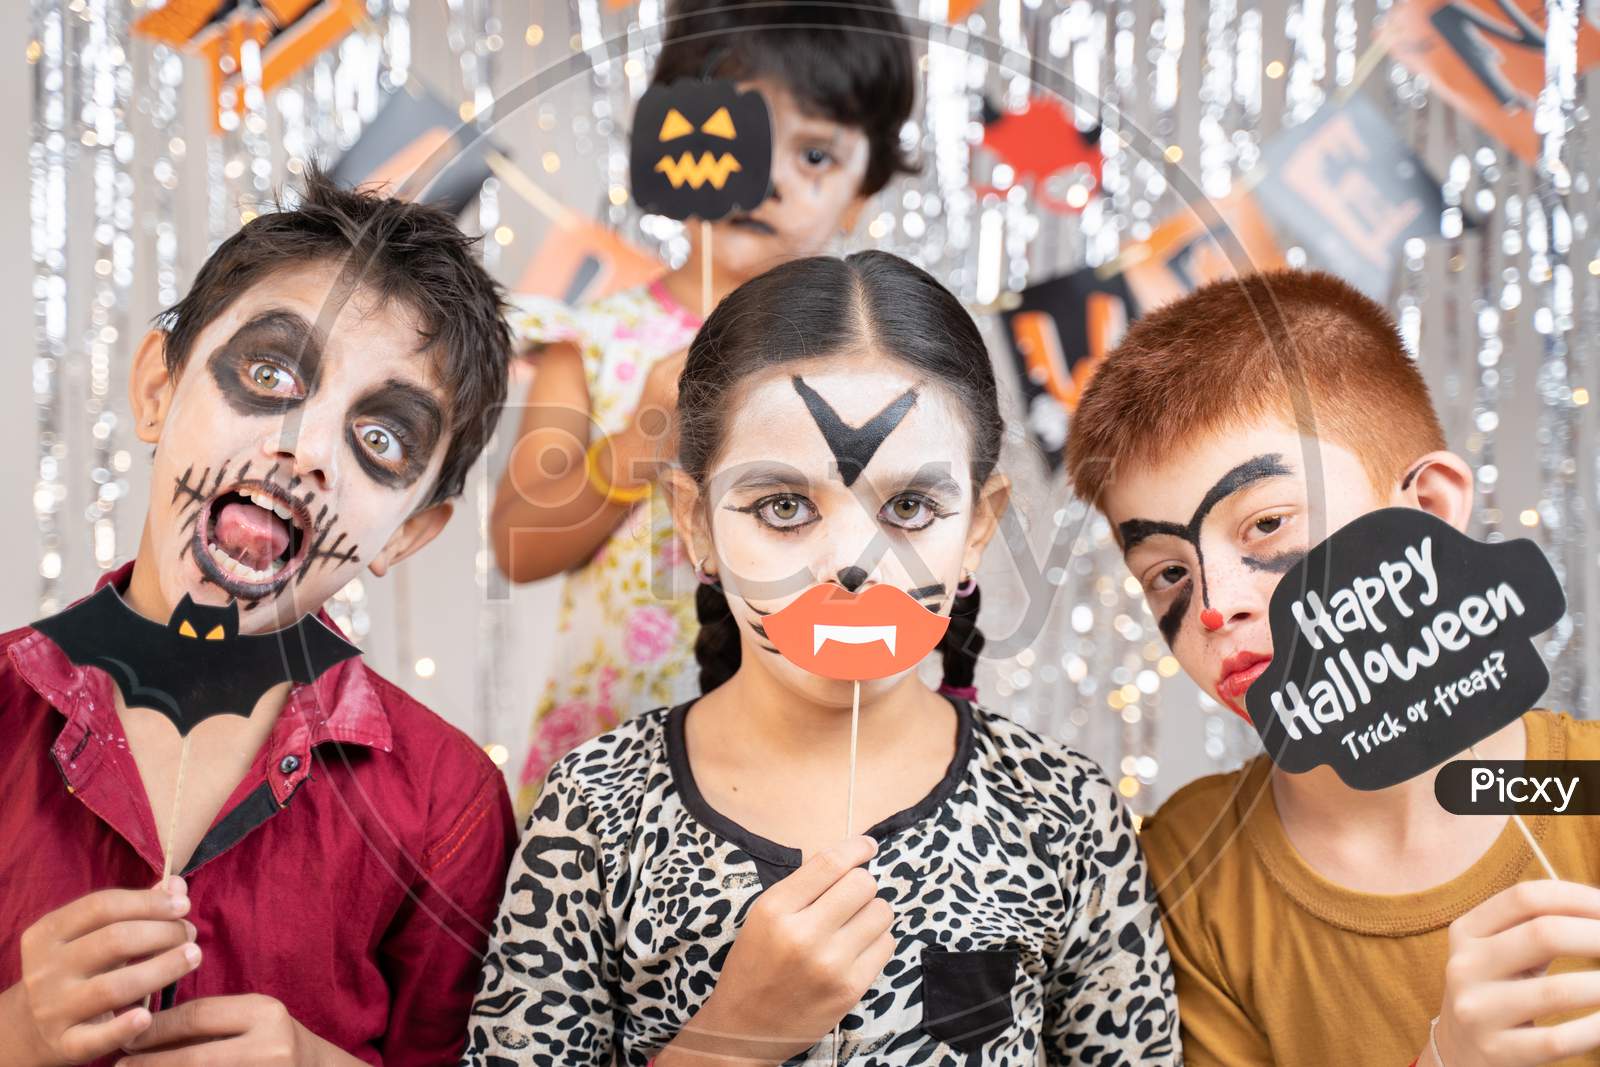 Group Of Kids In Halloween Costumes Making Gesticulating Scary Or Spooky Faces By Holding Booth Sprops On Decorated Background By Looking Into Camera.